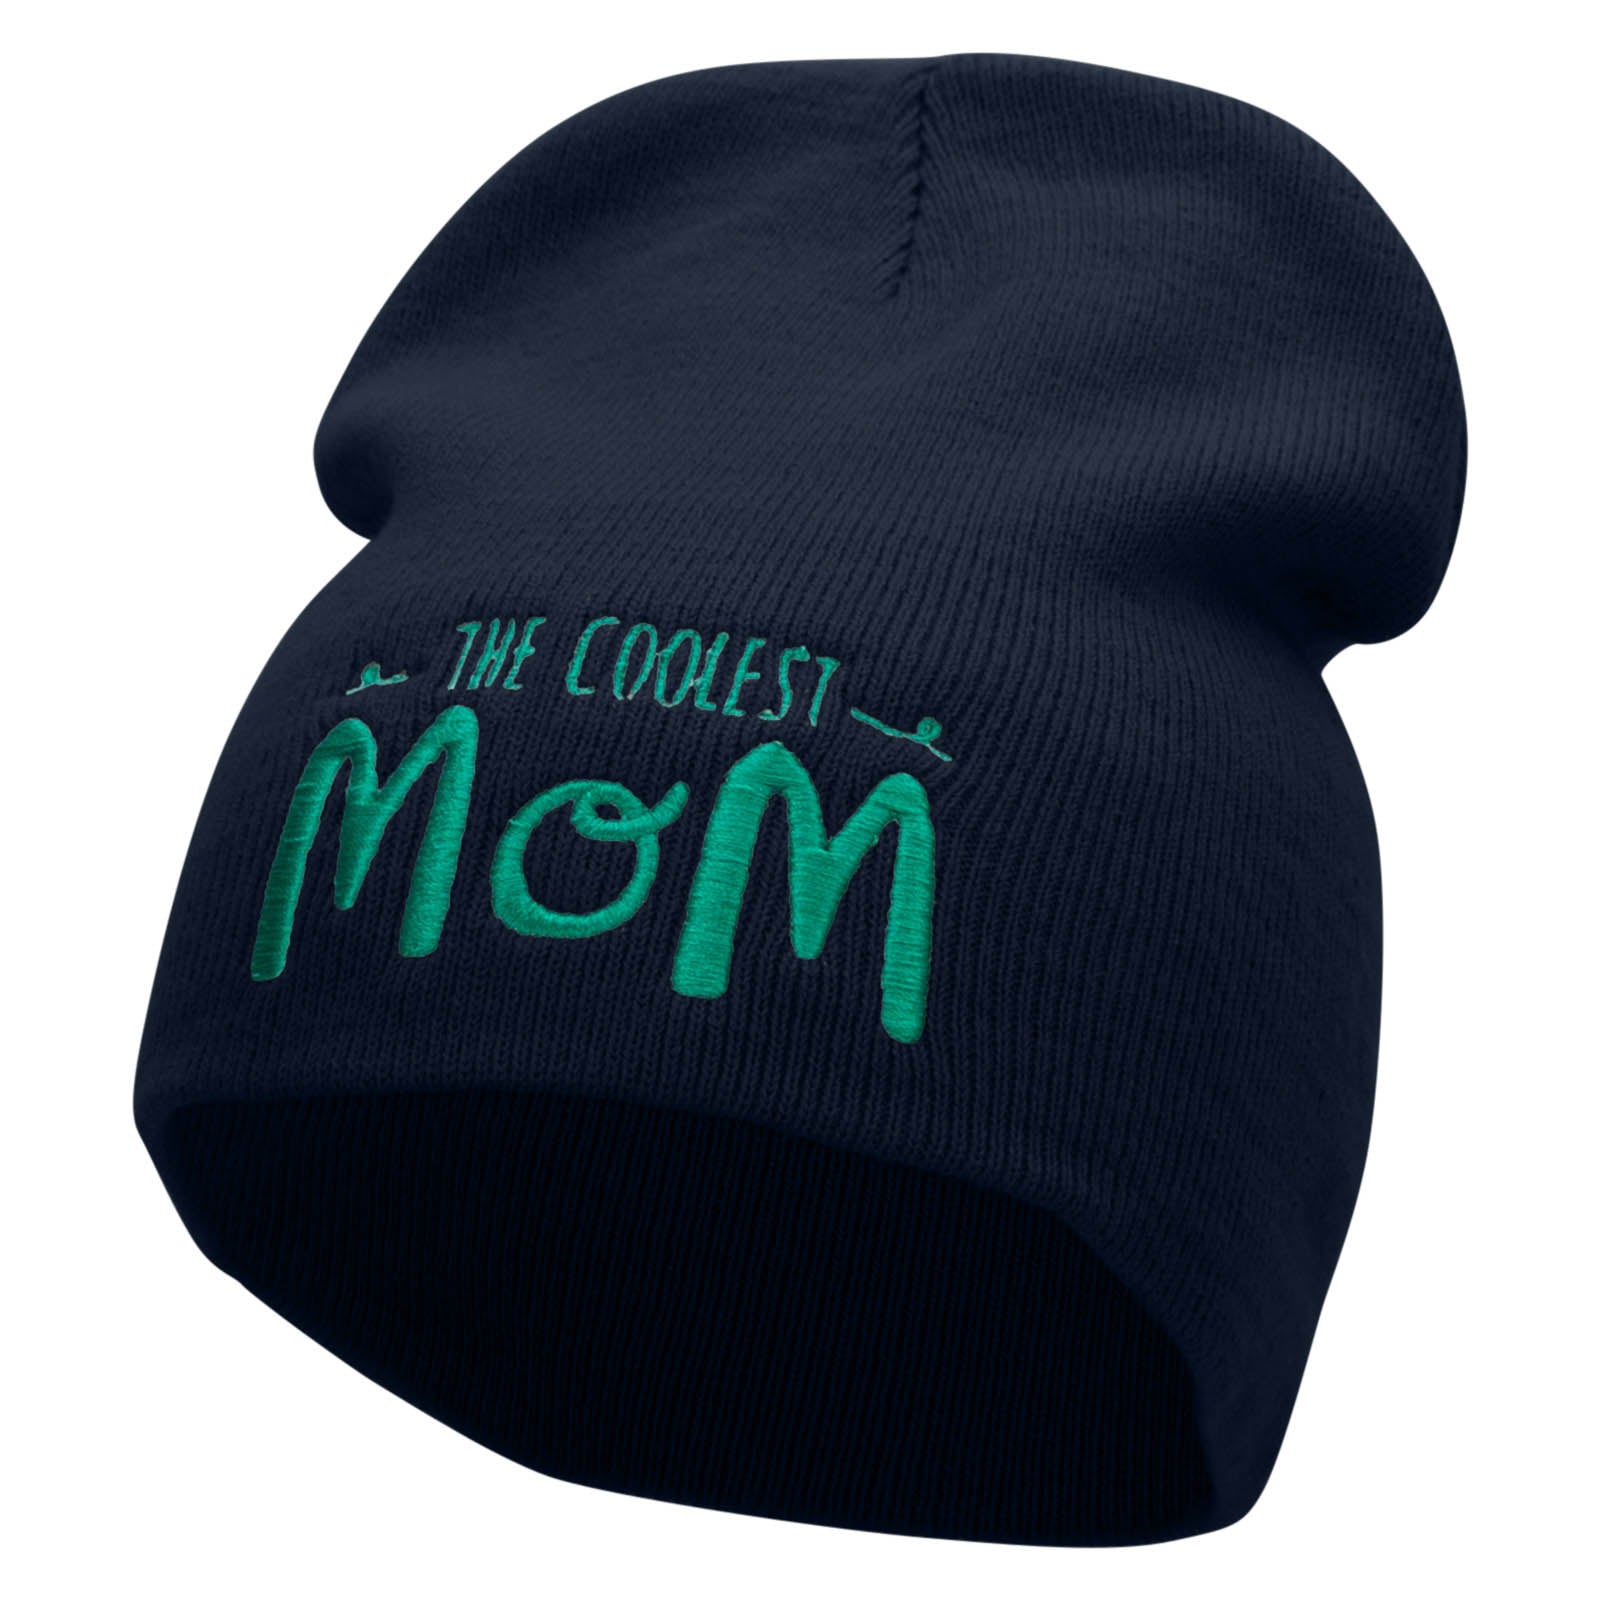 The Coolest Mom Embroidered 8 inch Acrylic Short Blank Beanie - Navy OSFM